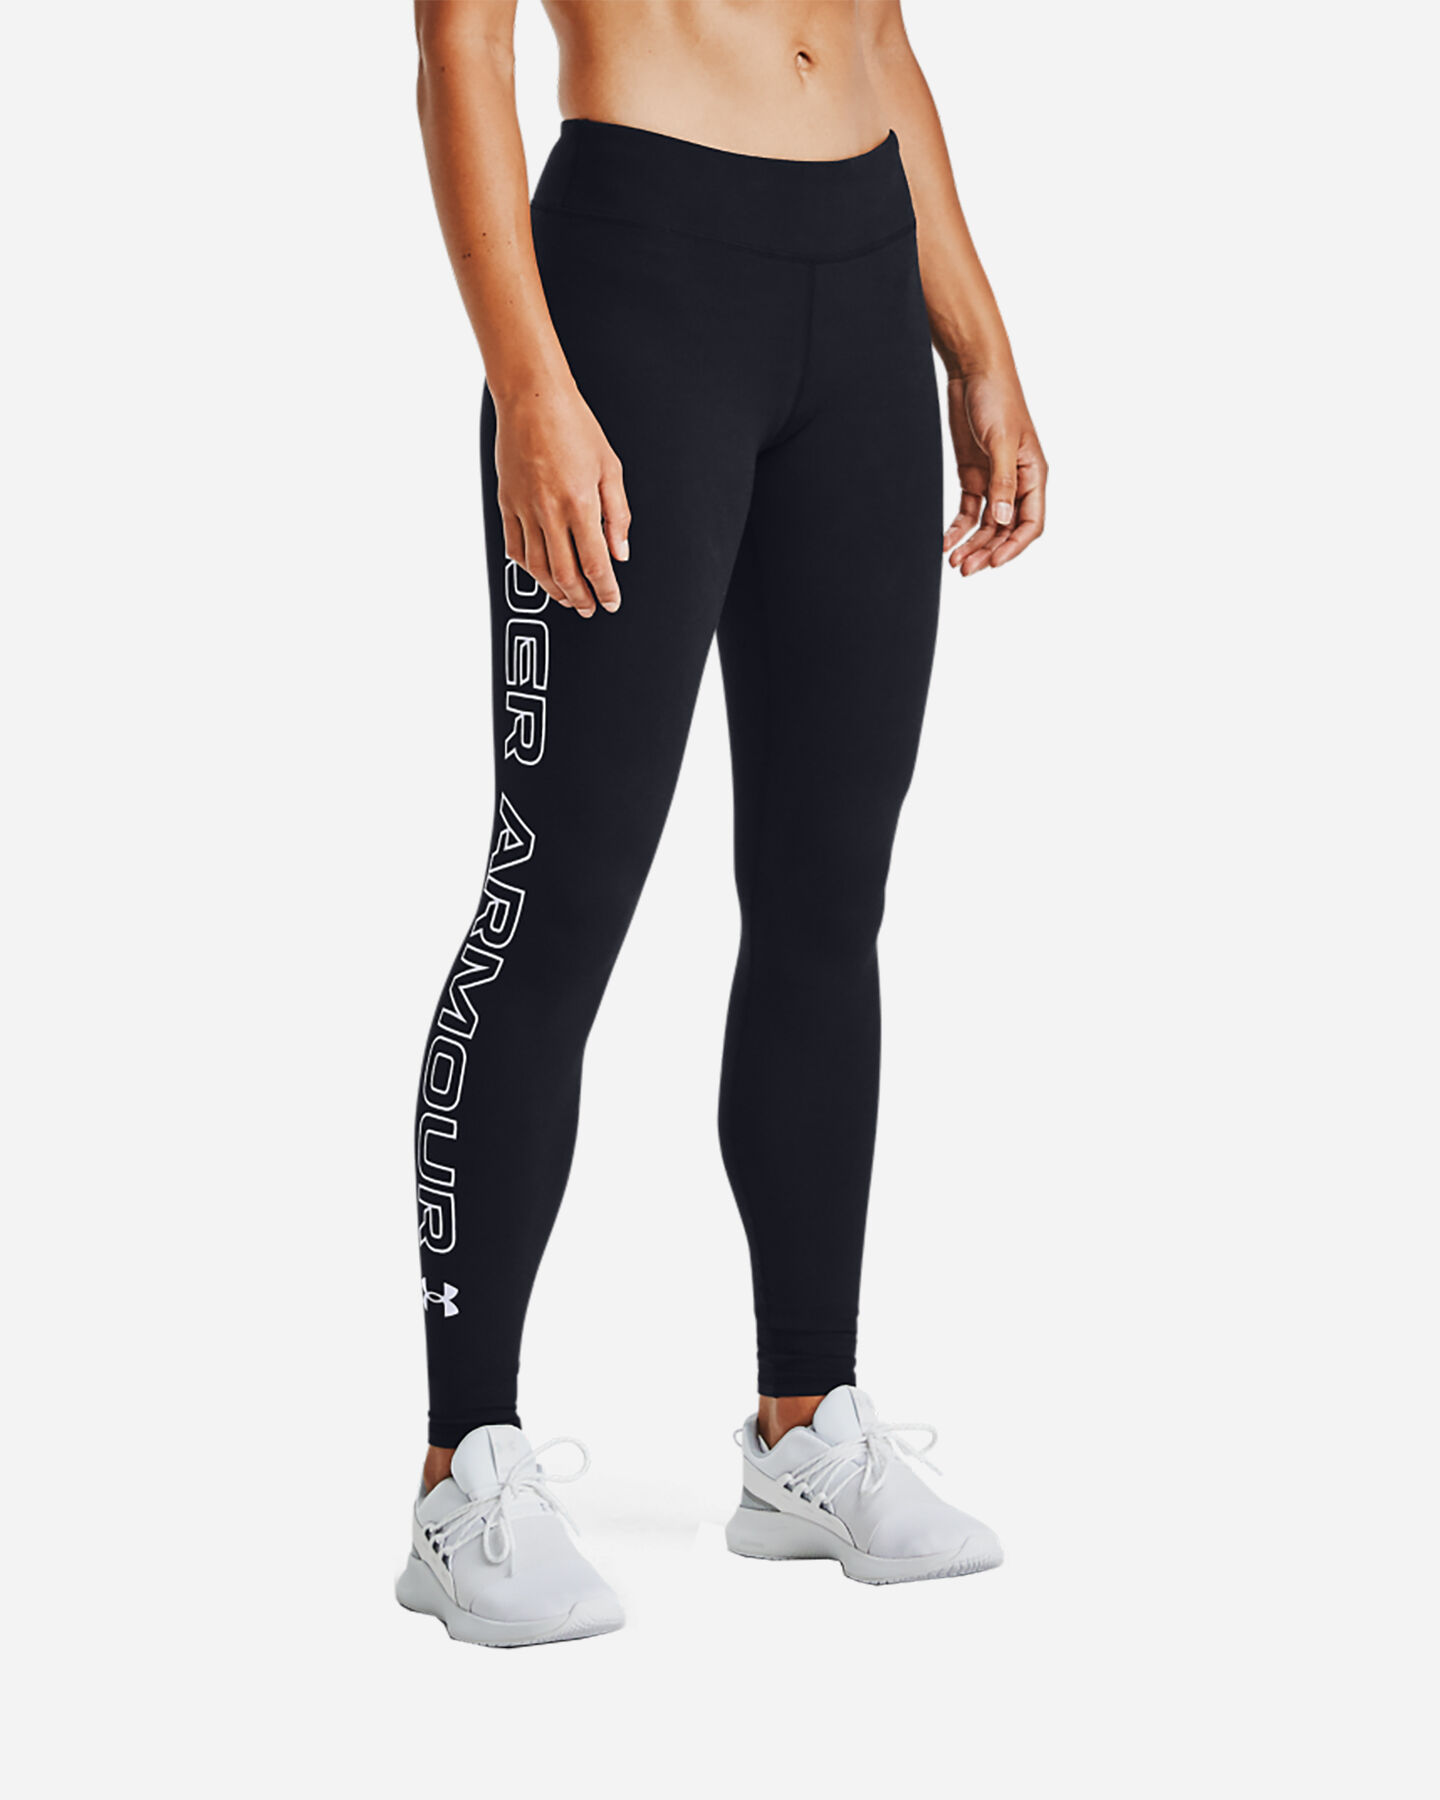  Leggings UNDER ARMOUR BIG LOGO LATERAL W S5229249|0001|XS scatto 2